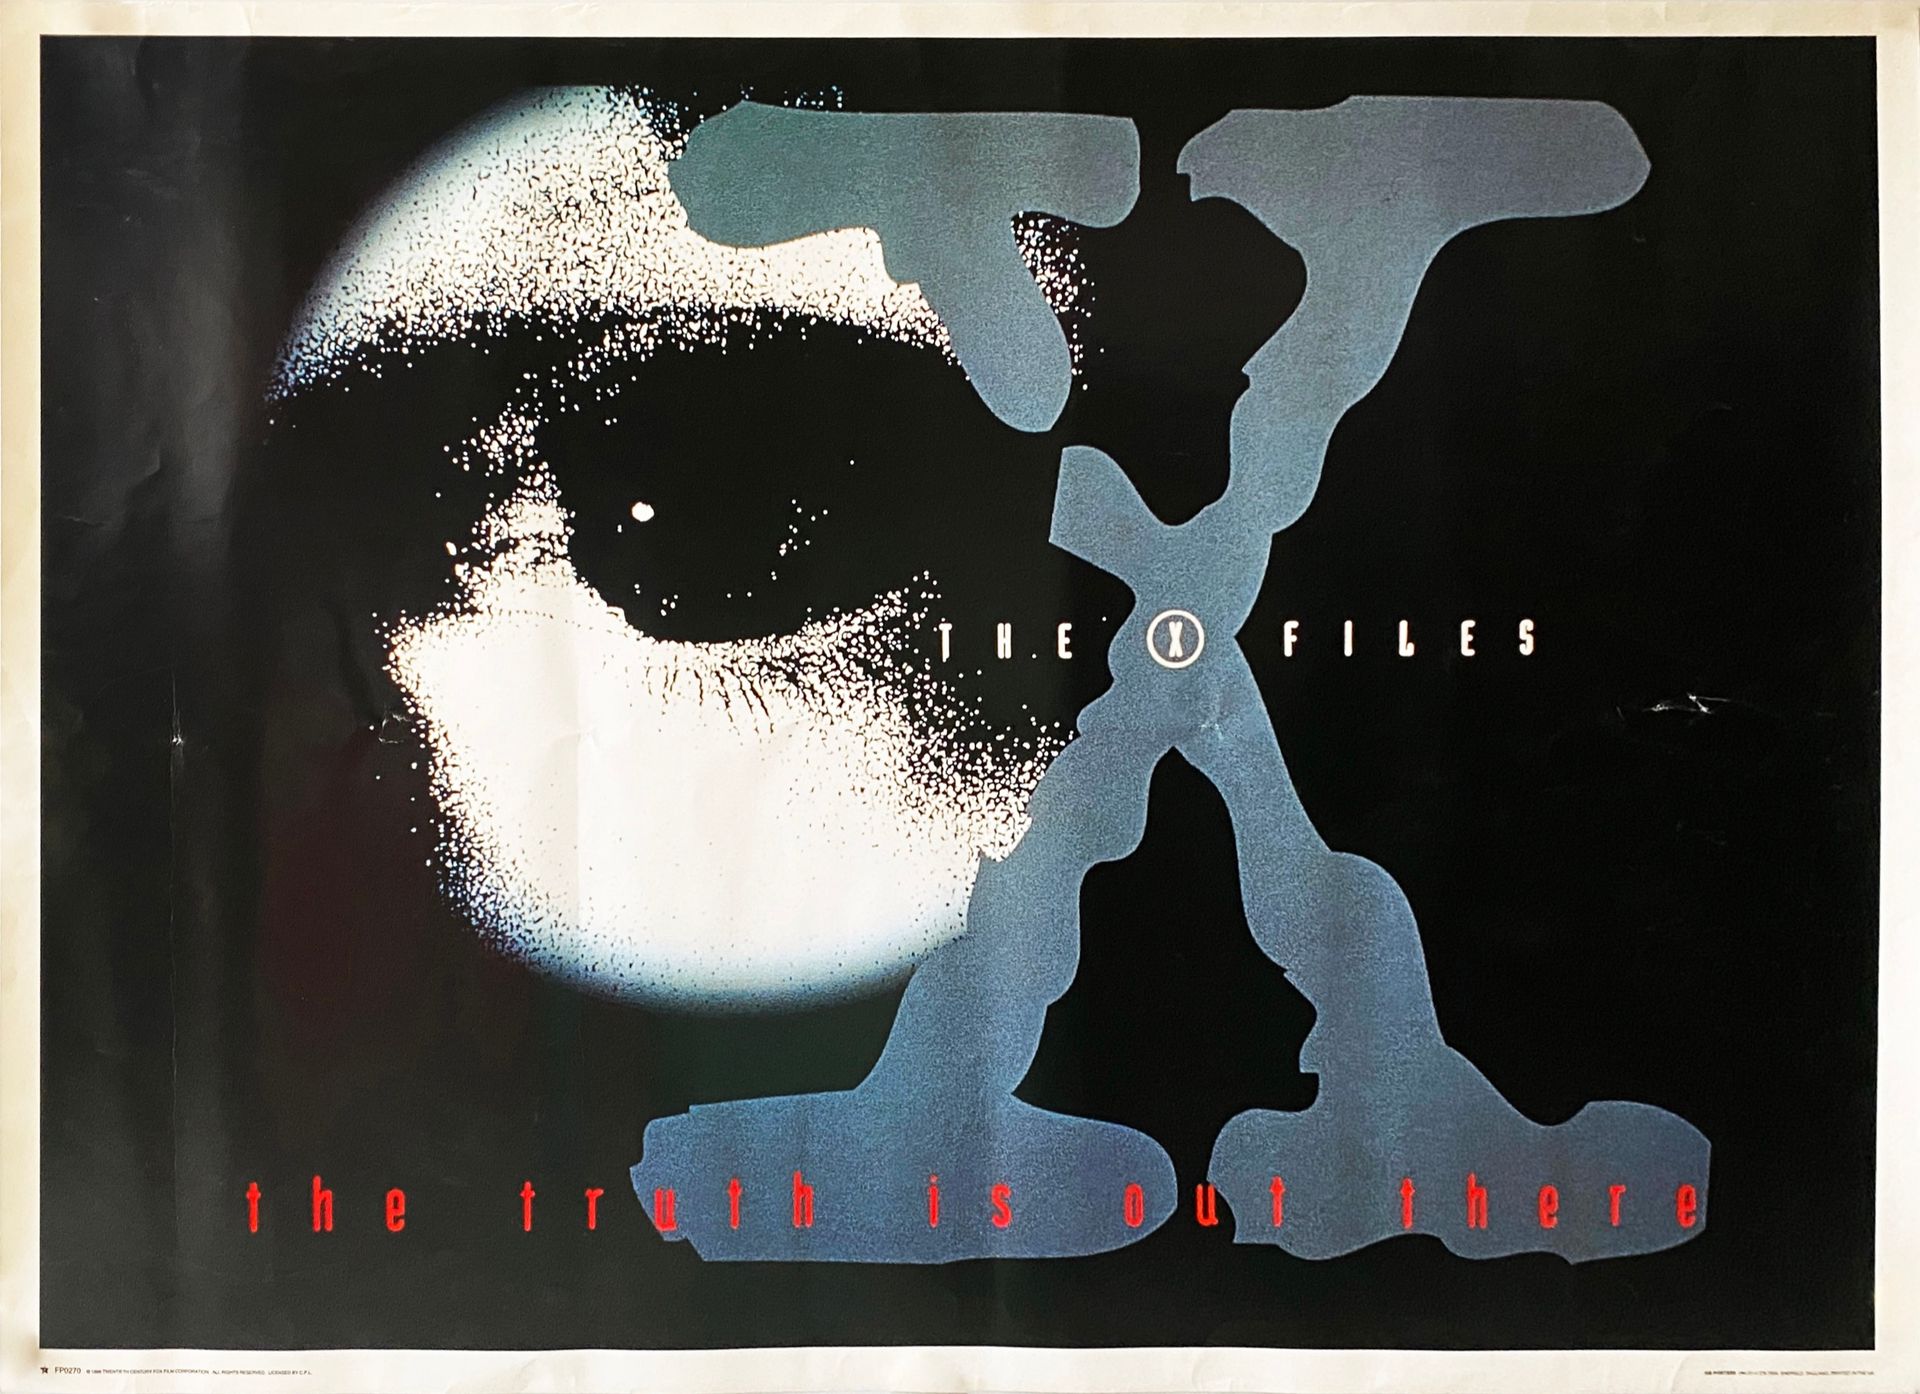 Null 
[CINEMA] - X-Files - "The truth is out there" poster. 

20世纪福克斯电影公司，1996年 &hellip;